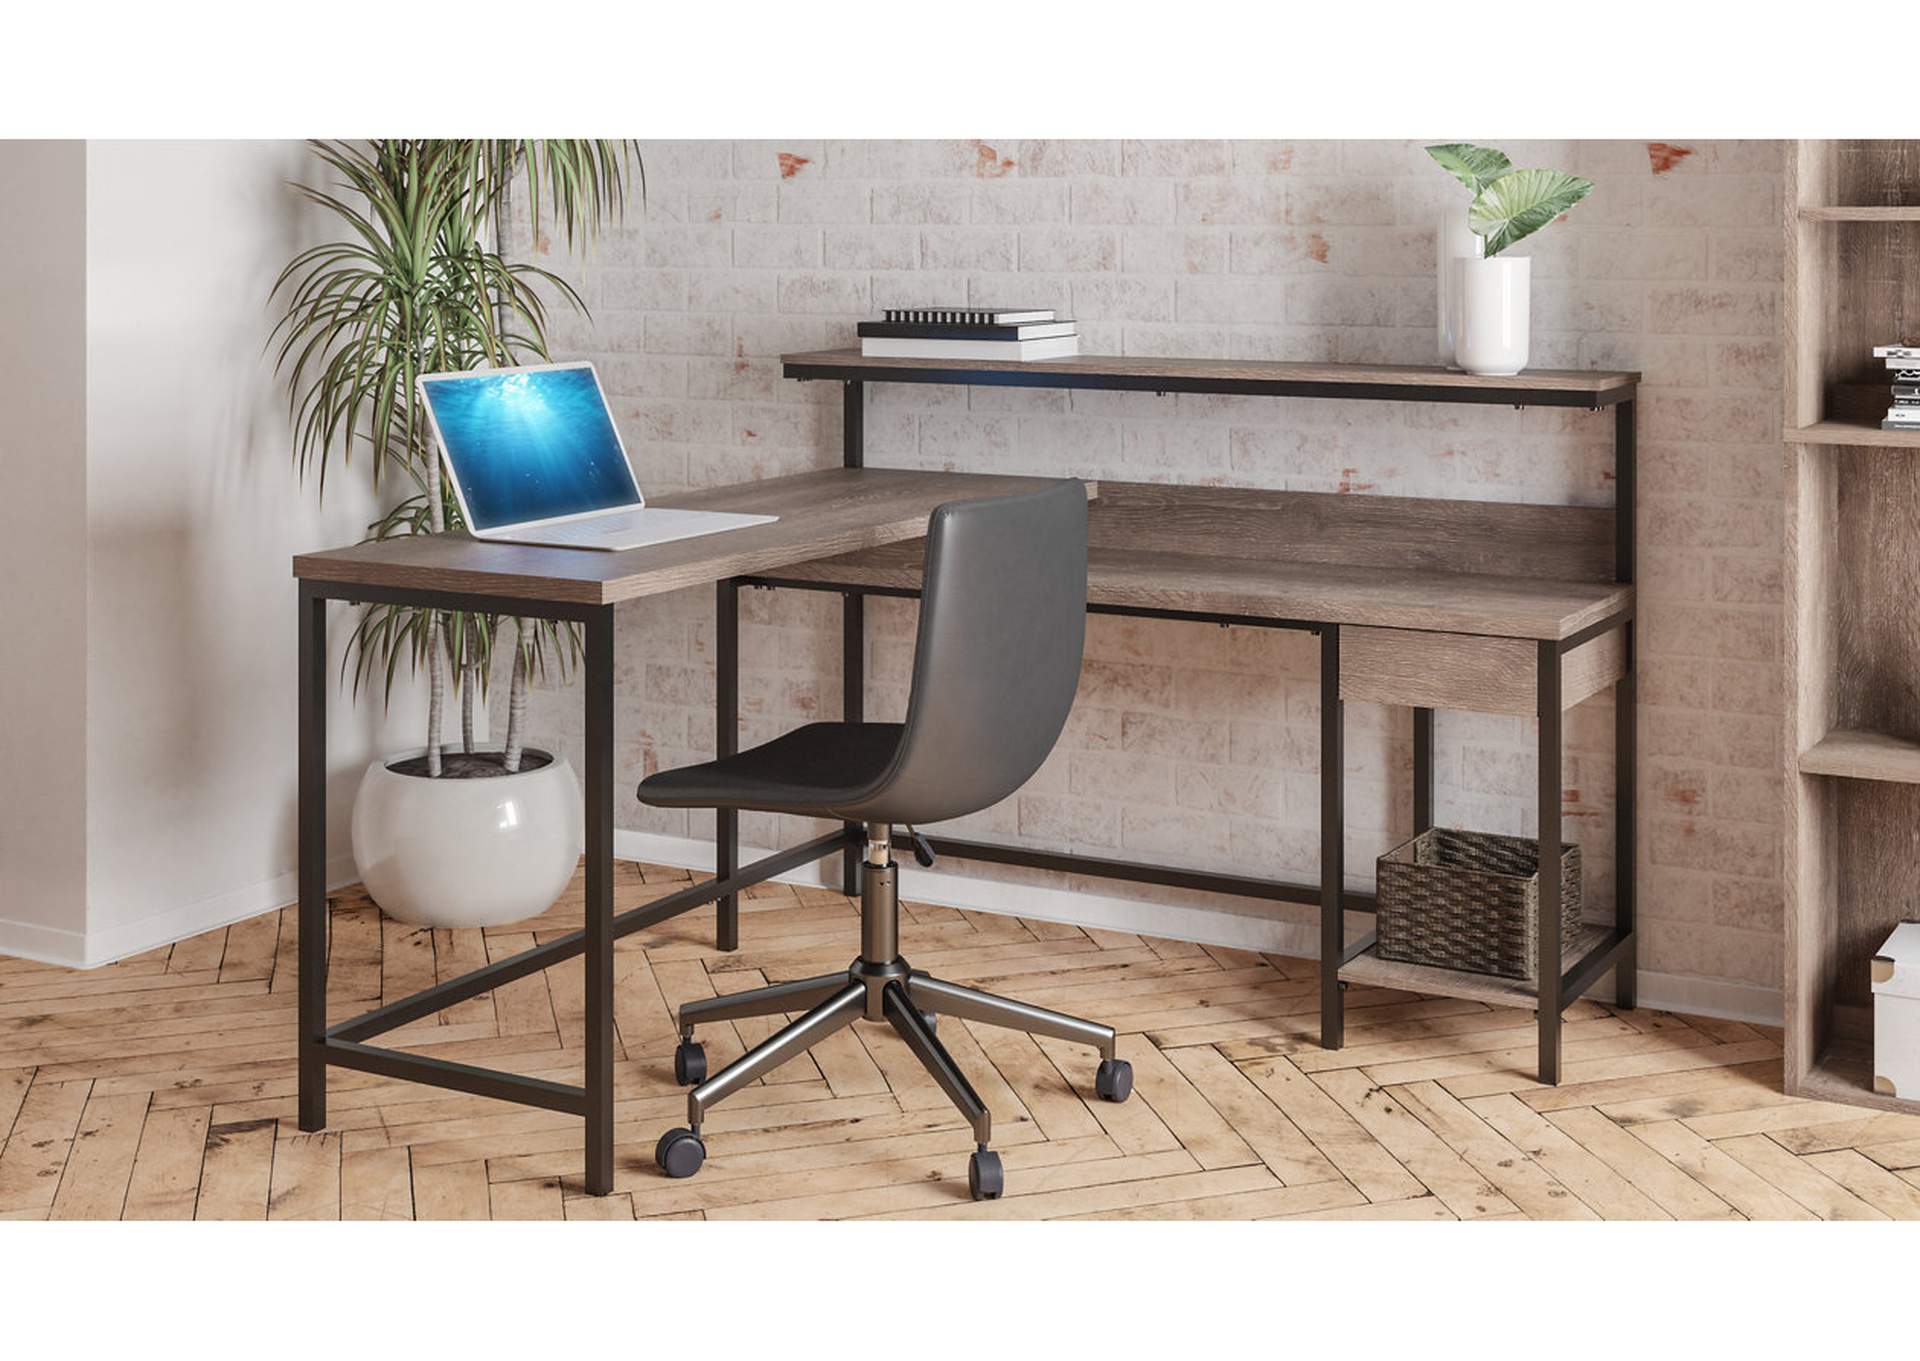 Arlenbry Gray Home Office Desk,Direct To Consumer Express